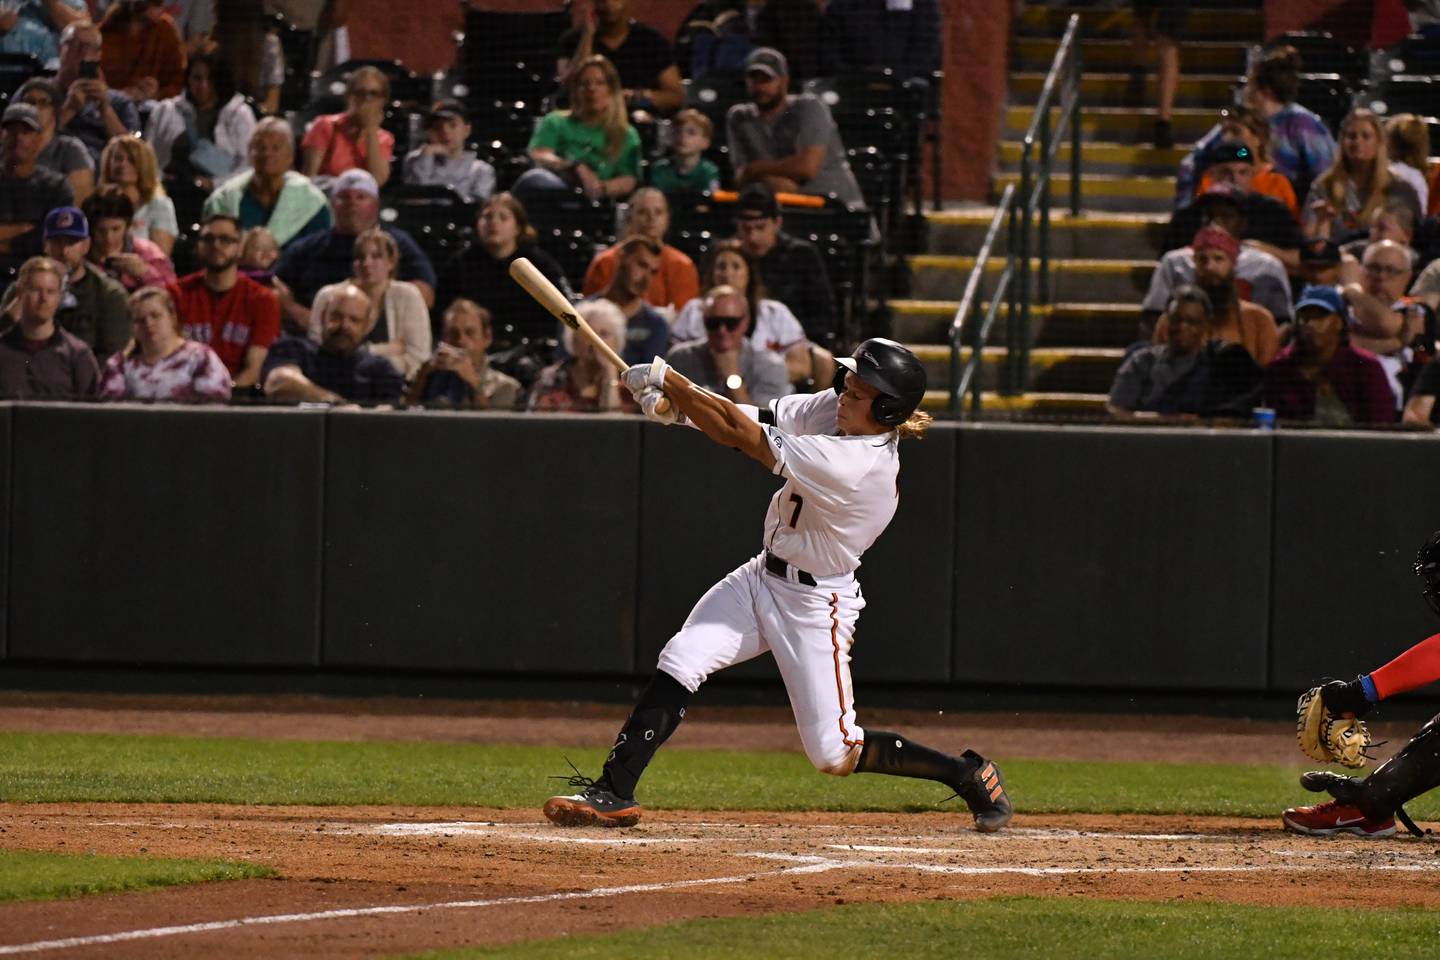 This photo shows Jackson Holliday, a left-handed hitter, continuing his swing after making contact with a baseball.